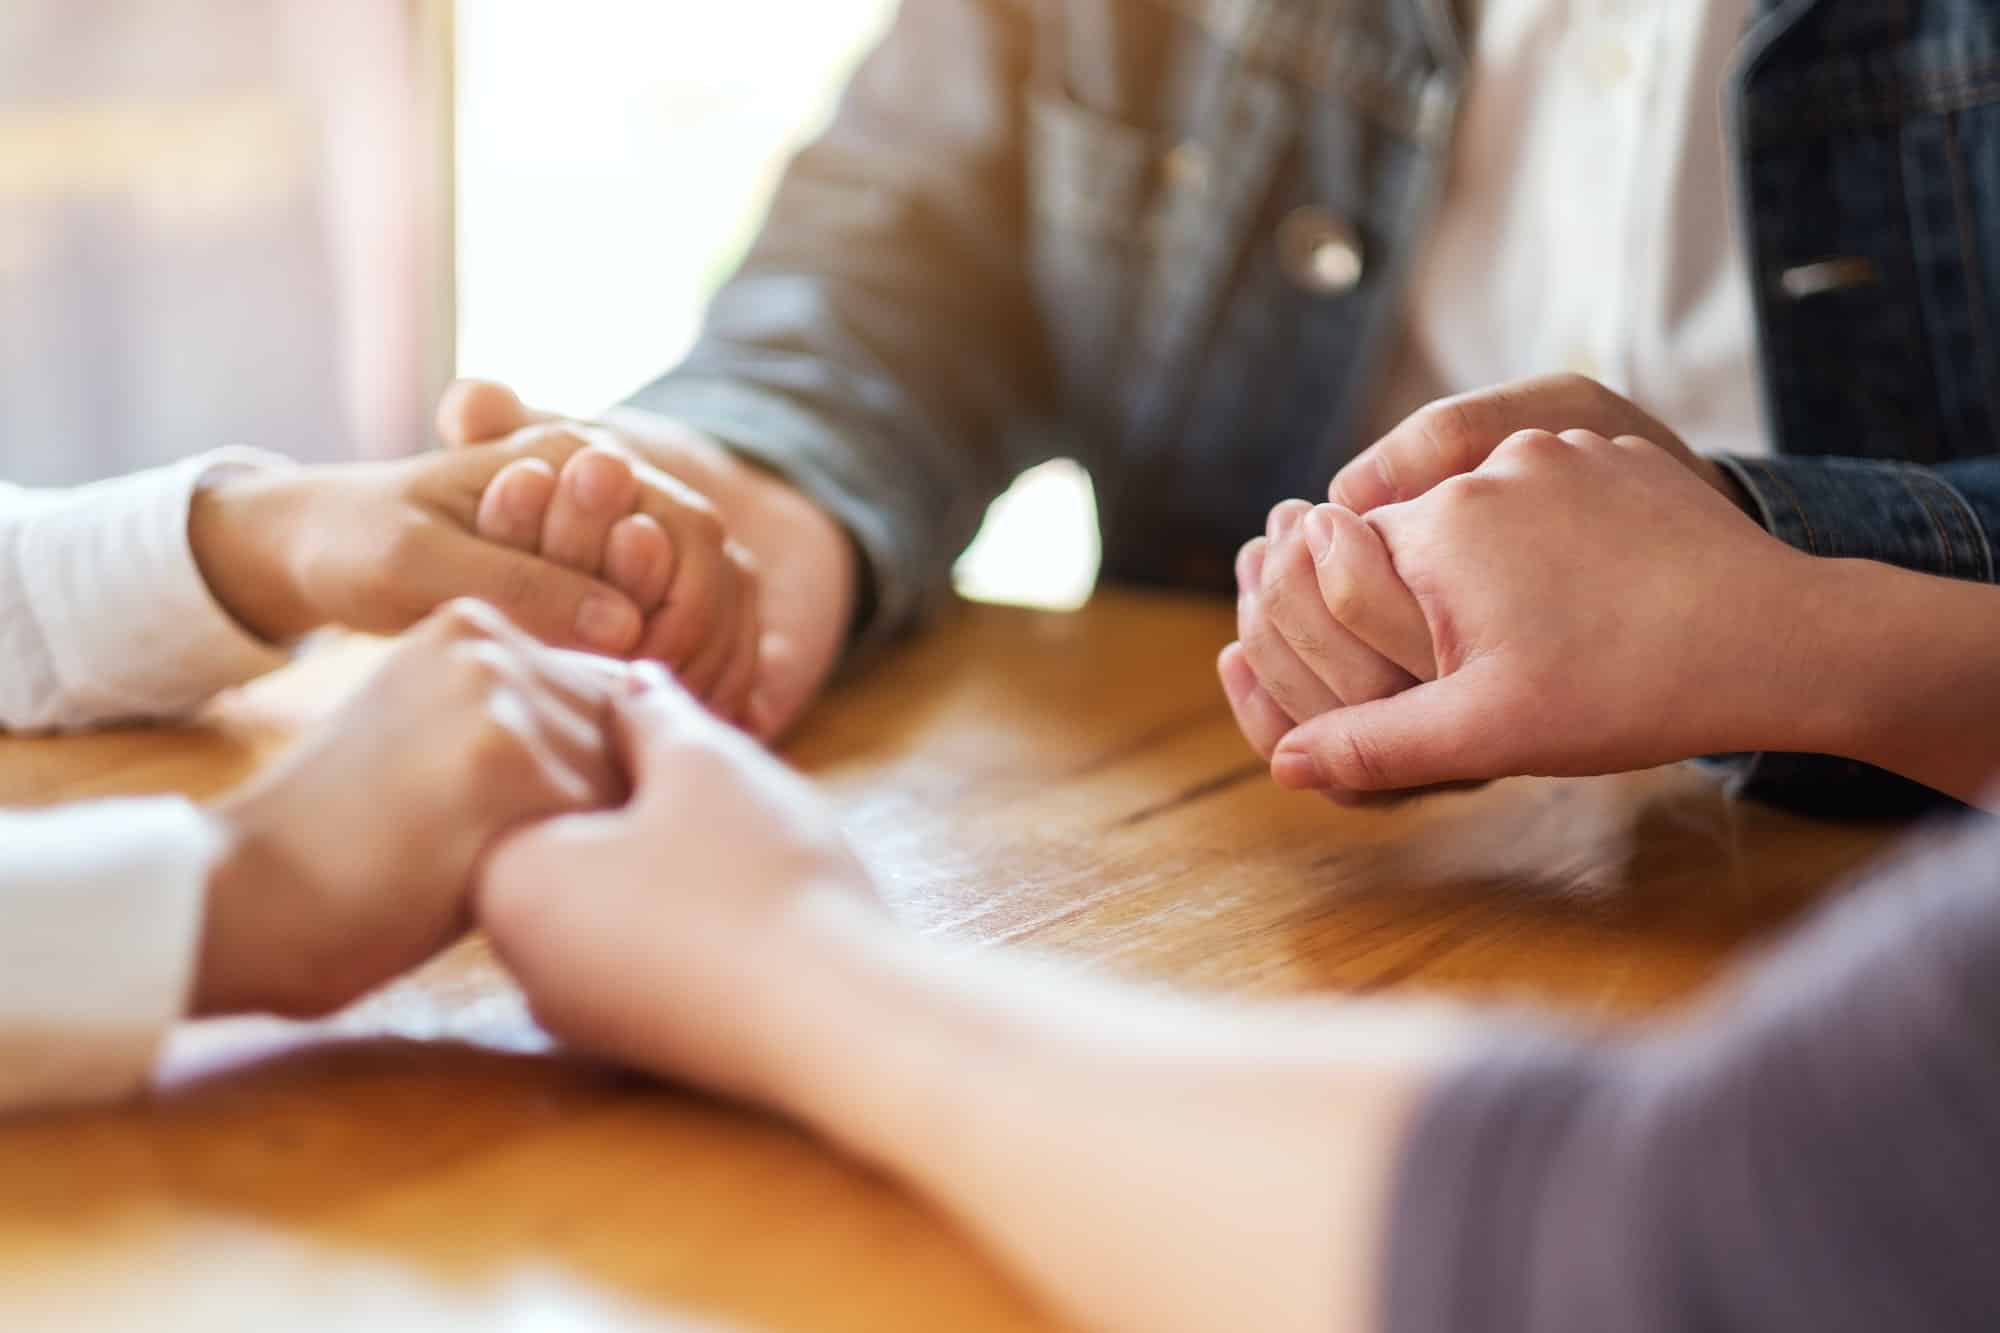 Group of people sitting in a circle holding hands and pray together or in therapy session